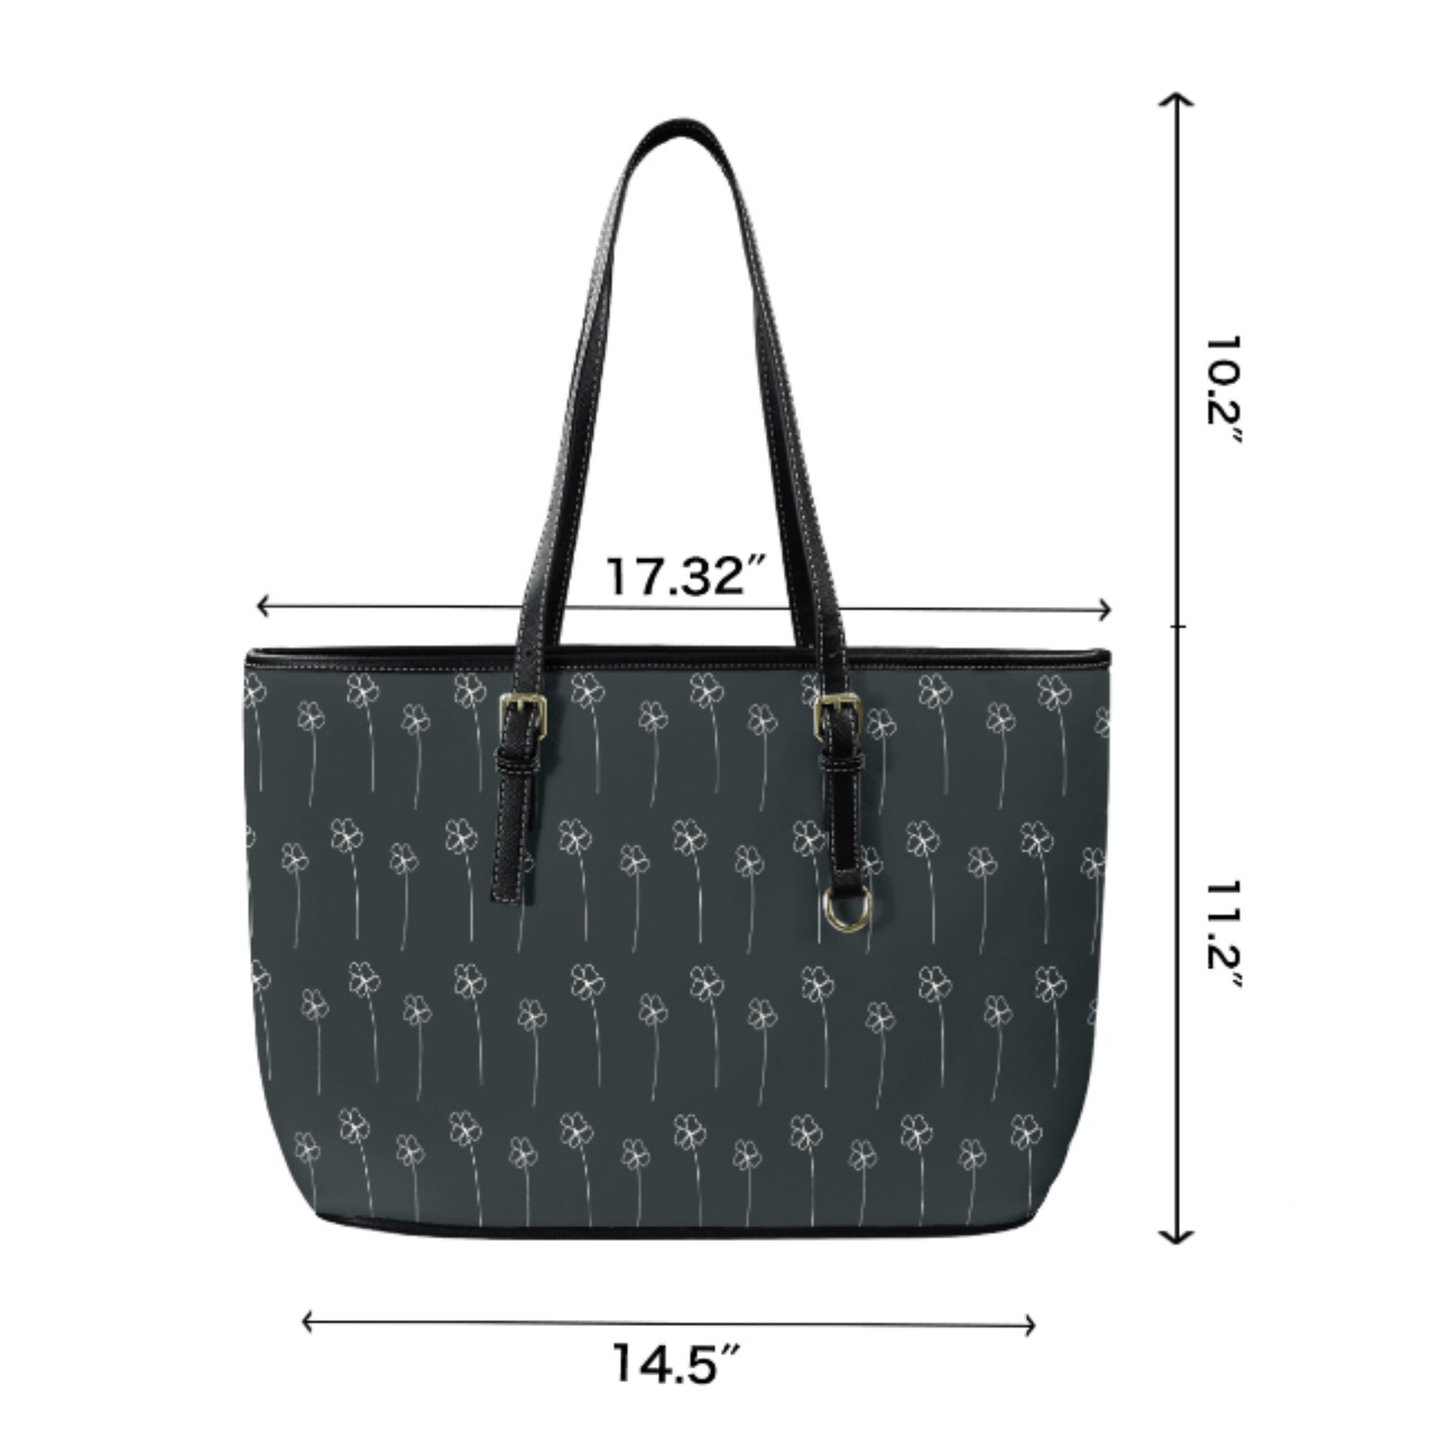 The size in inches shows over fourteen inces wide at the bottom, over eleven inches height on the bag, and over seventeen inches width at the opening of the tote bag purse.